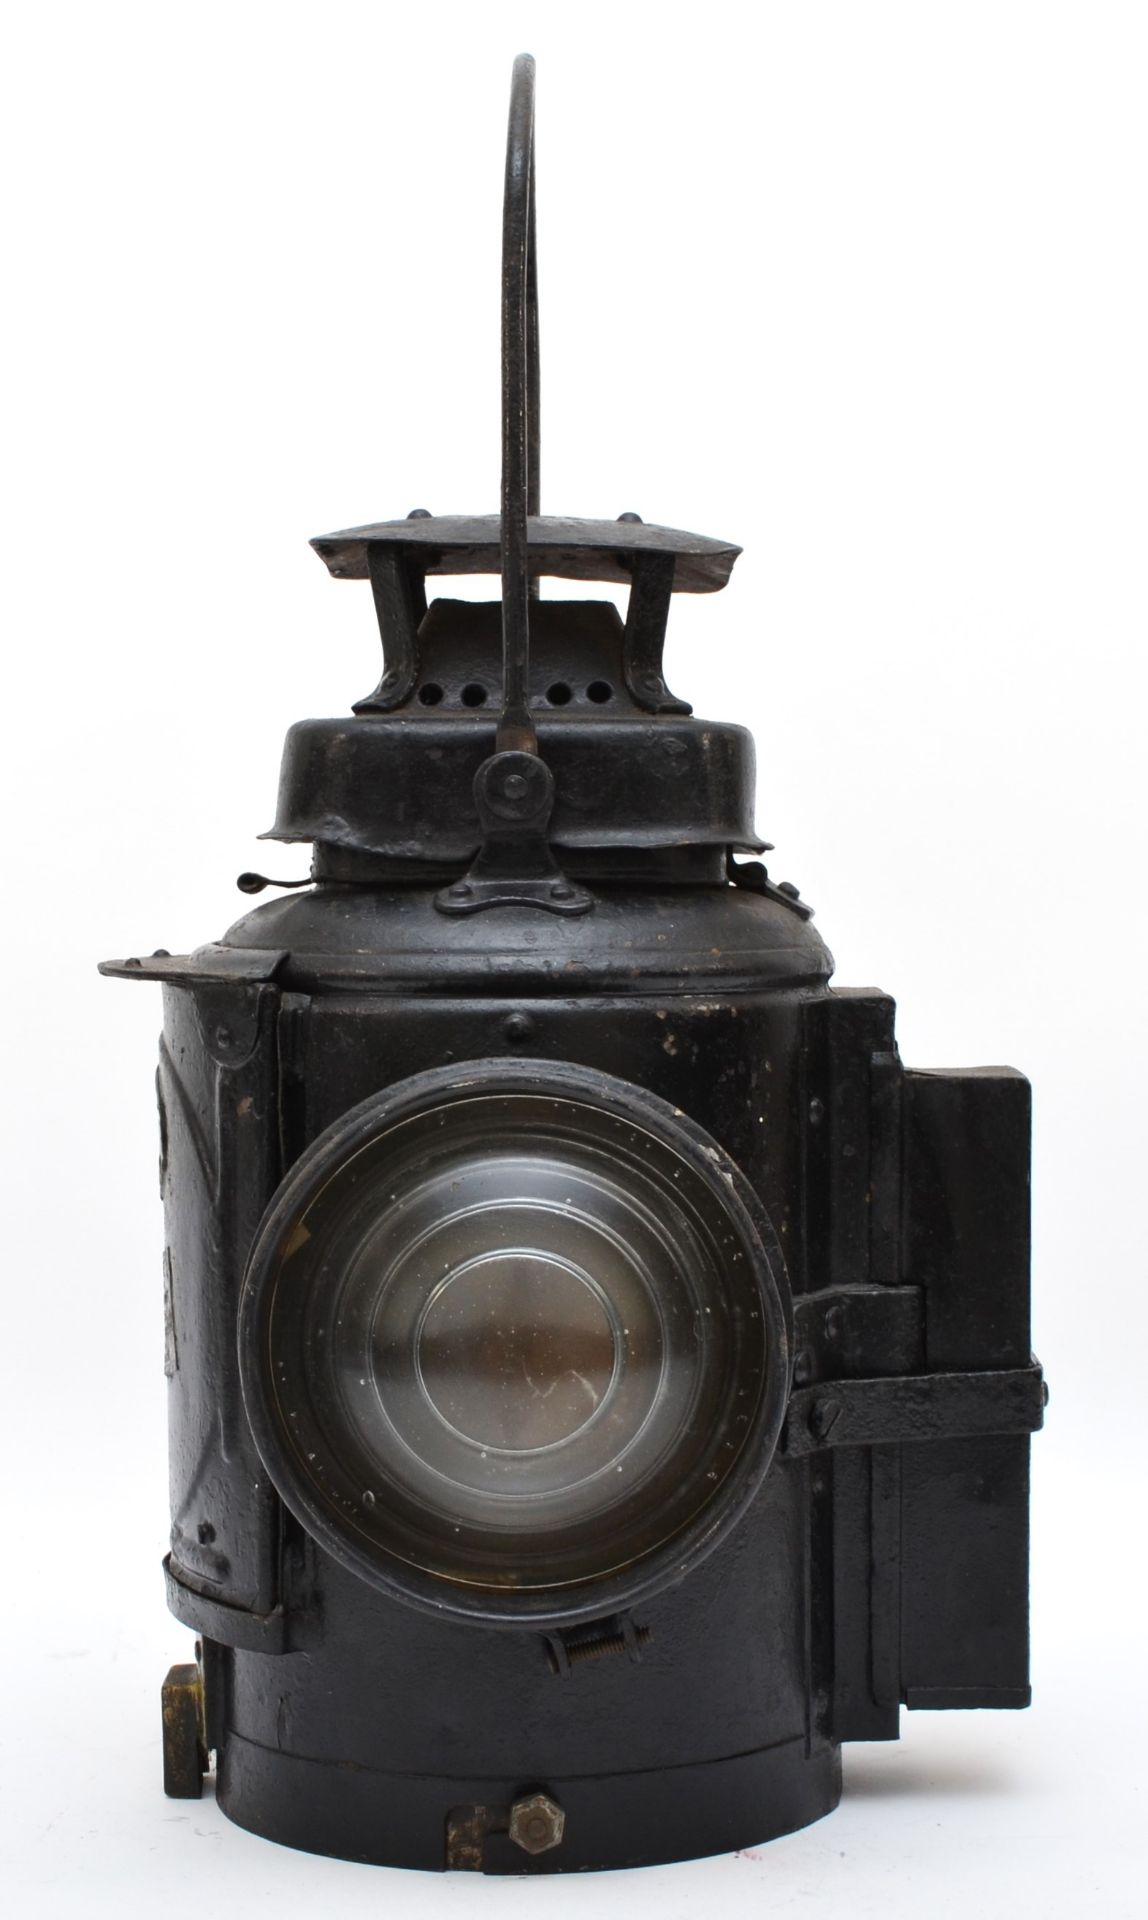 Adlake non-sweating railway lamp, complete with burner, brass pluaqe stamped with L.M.S. Railways